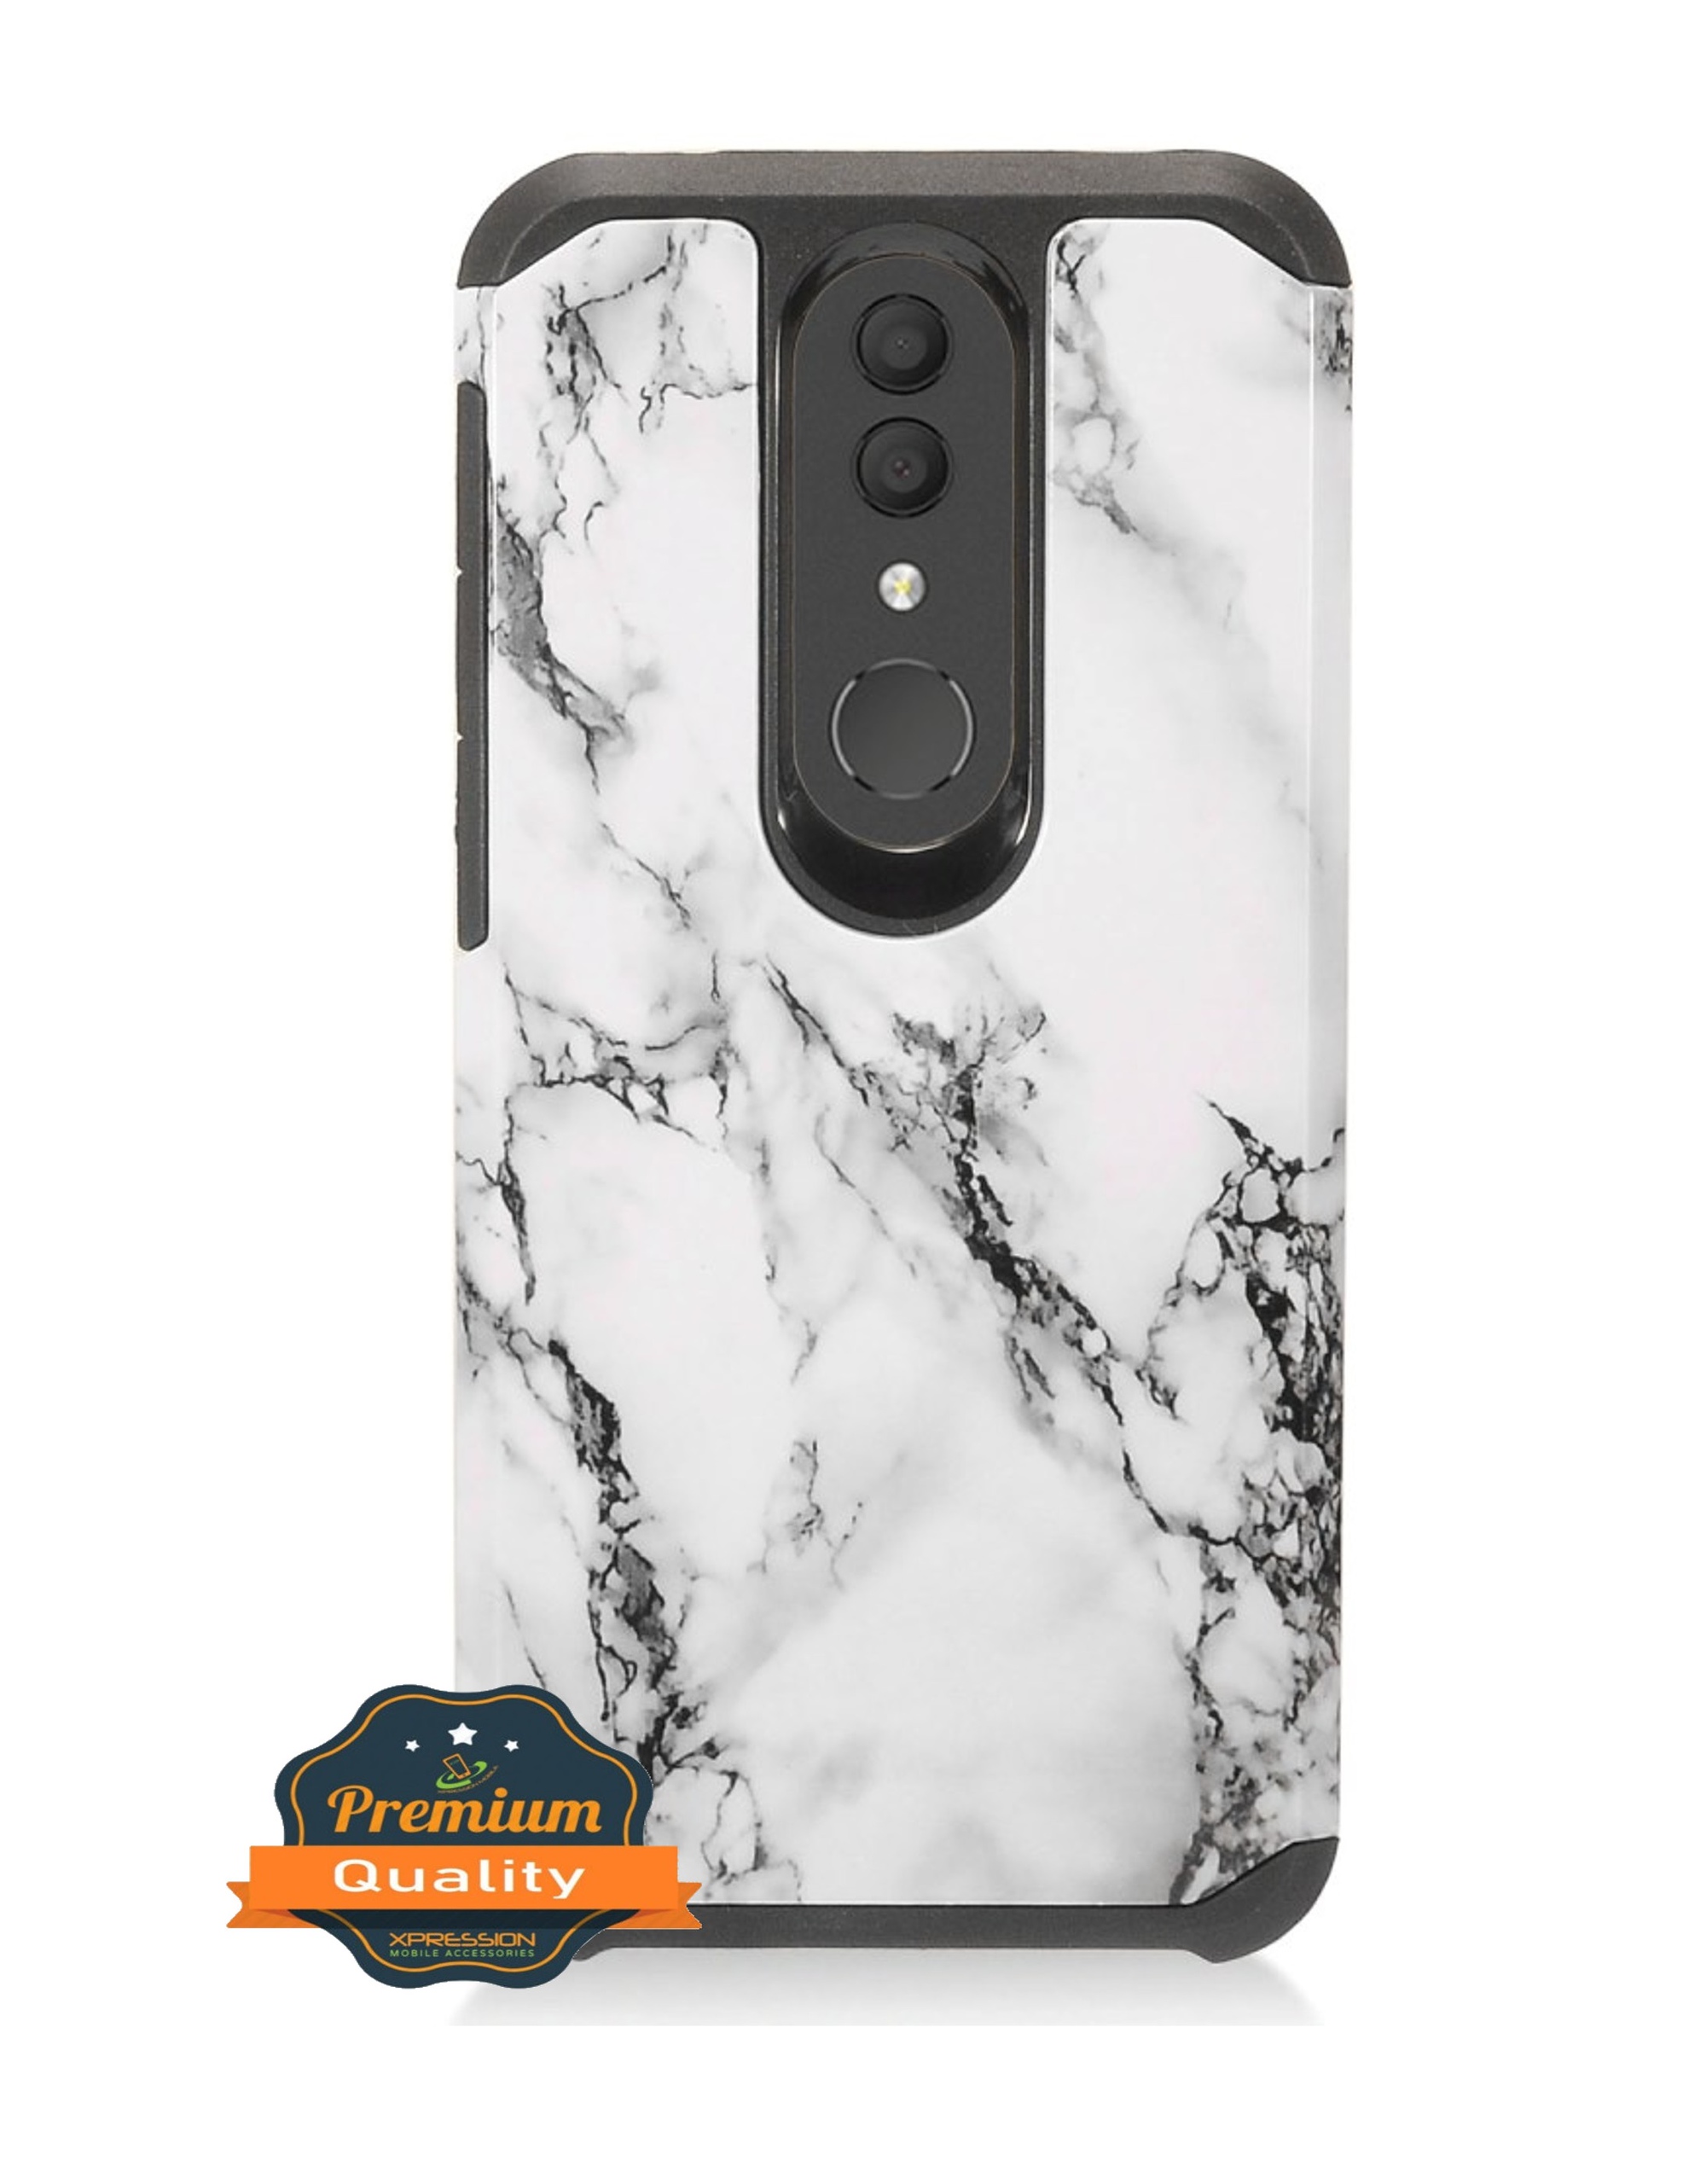 Case for Samsung Galaxy A32 5G Stylish Design Floral Armor Dual Layer Hard Shockproof TPU Hybrid Protection Slim Cover for Galaxy A32 5G by Xcell - Marble White - image 4 of 9